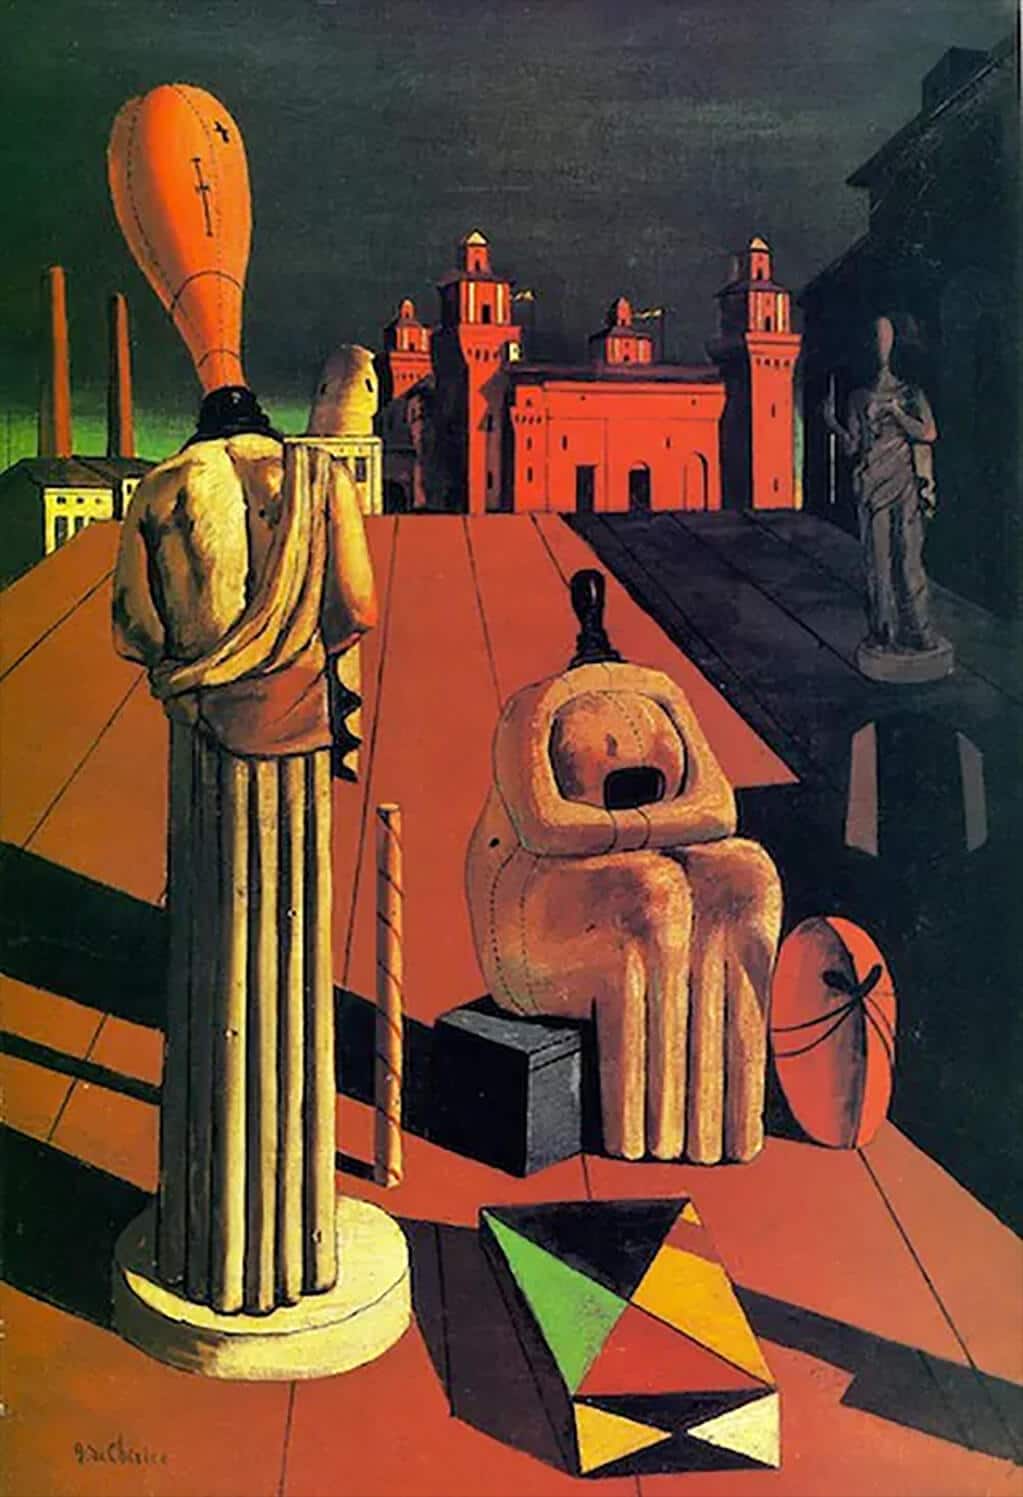 The Disquieting Muses, de Chirico (1918); private collection